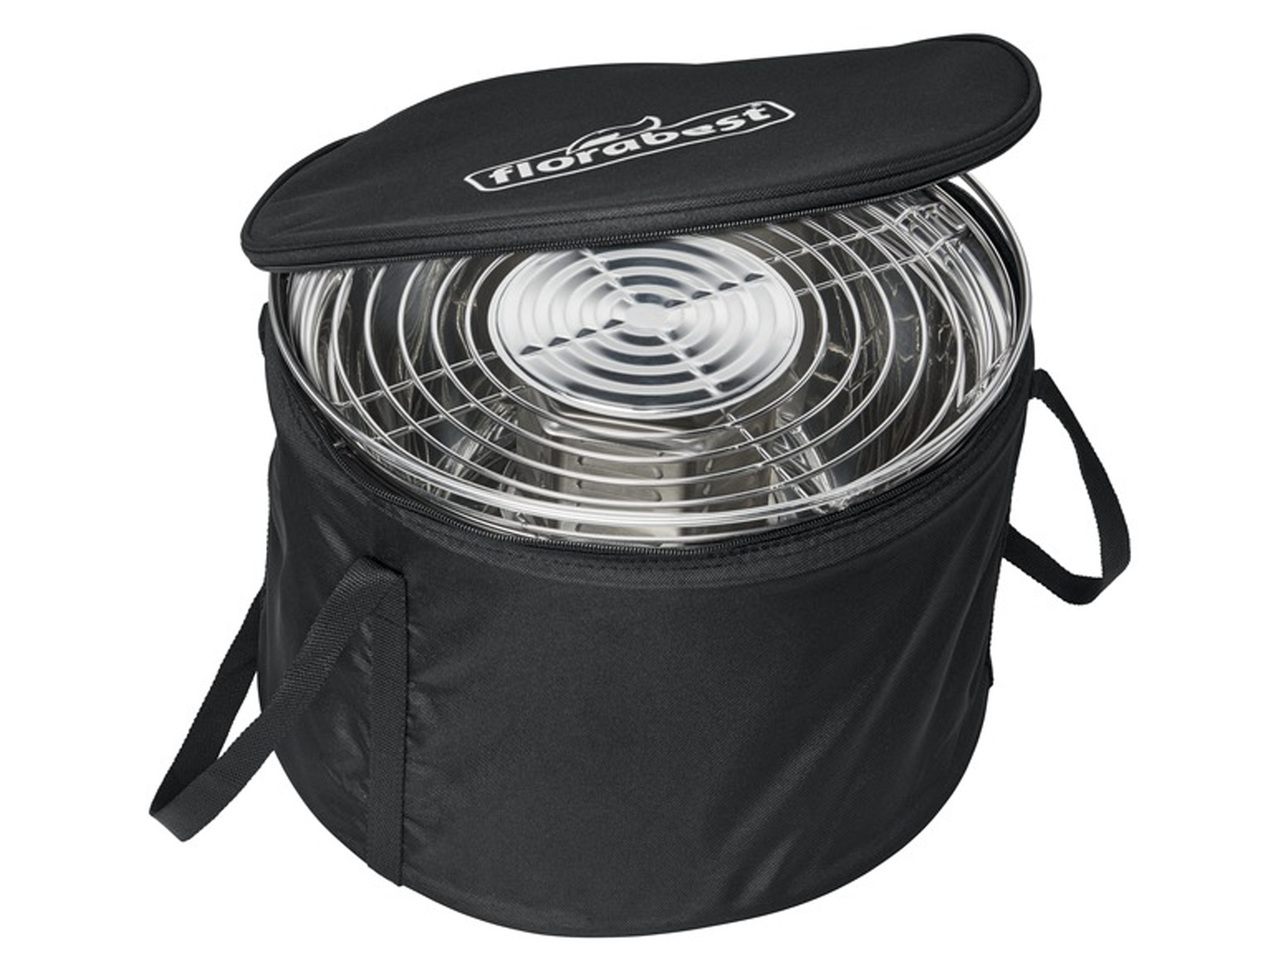 FLORABEST Ventilated Charcoal Barbecue